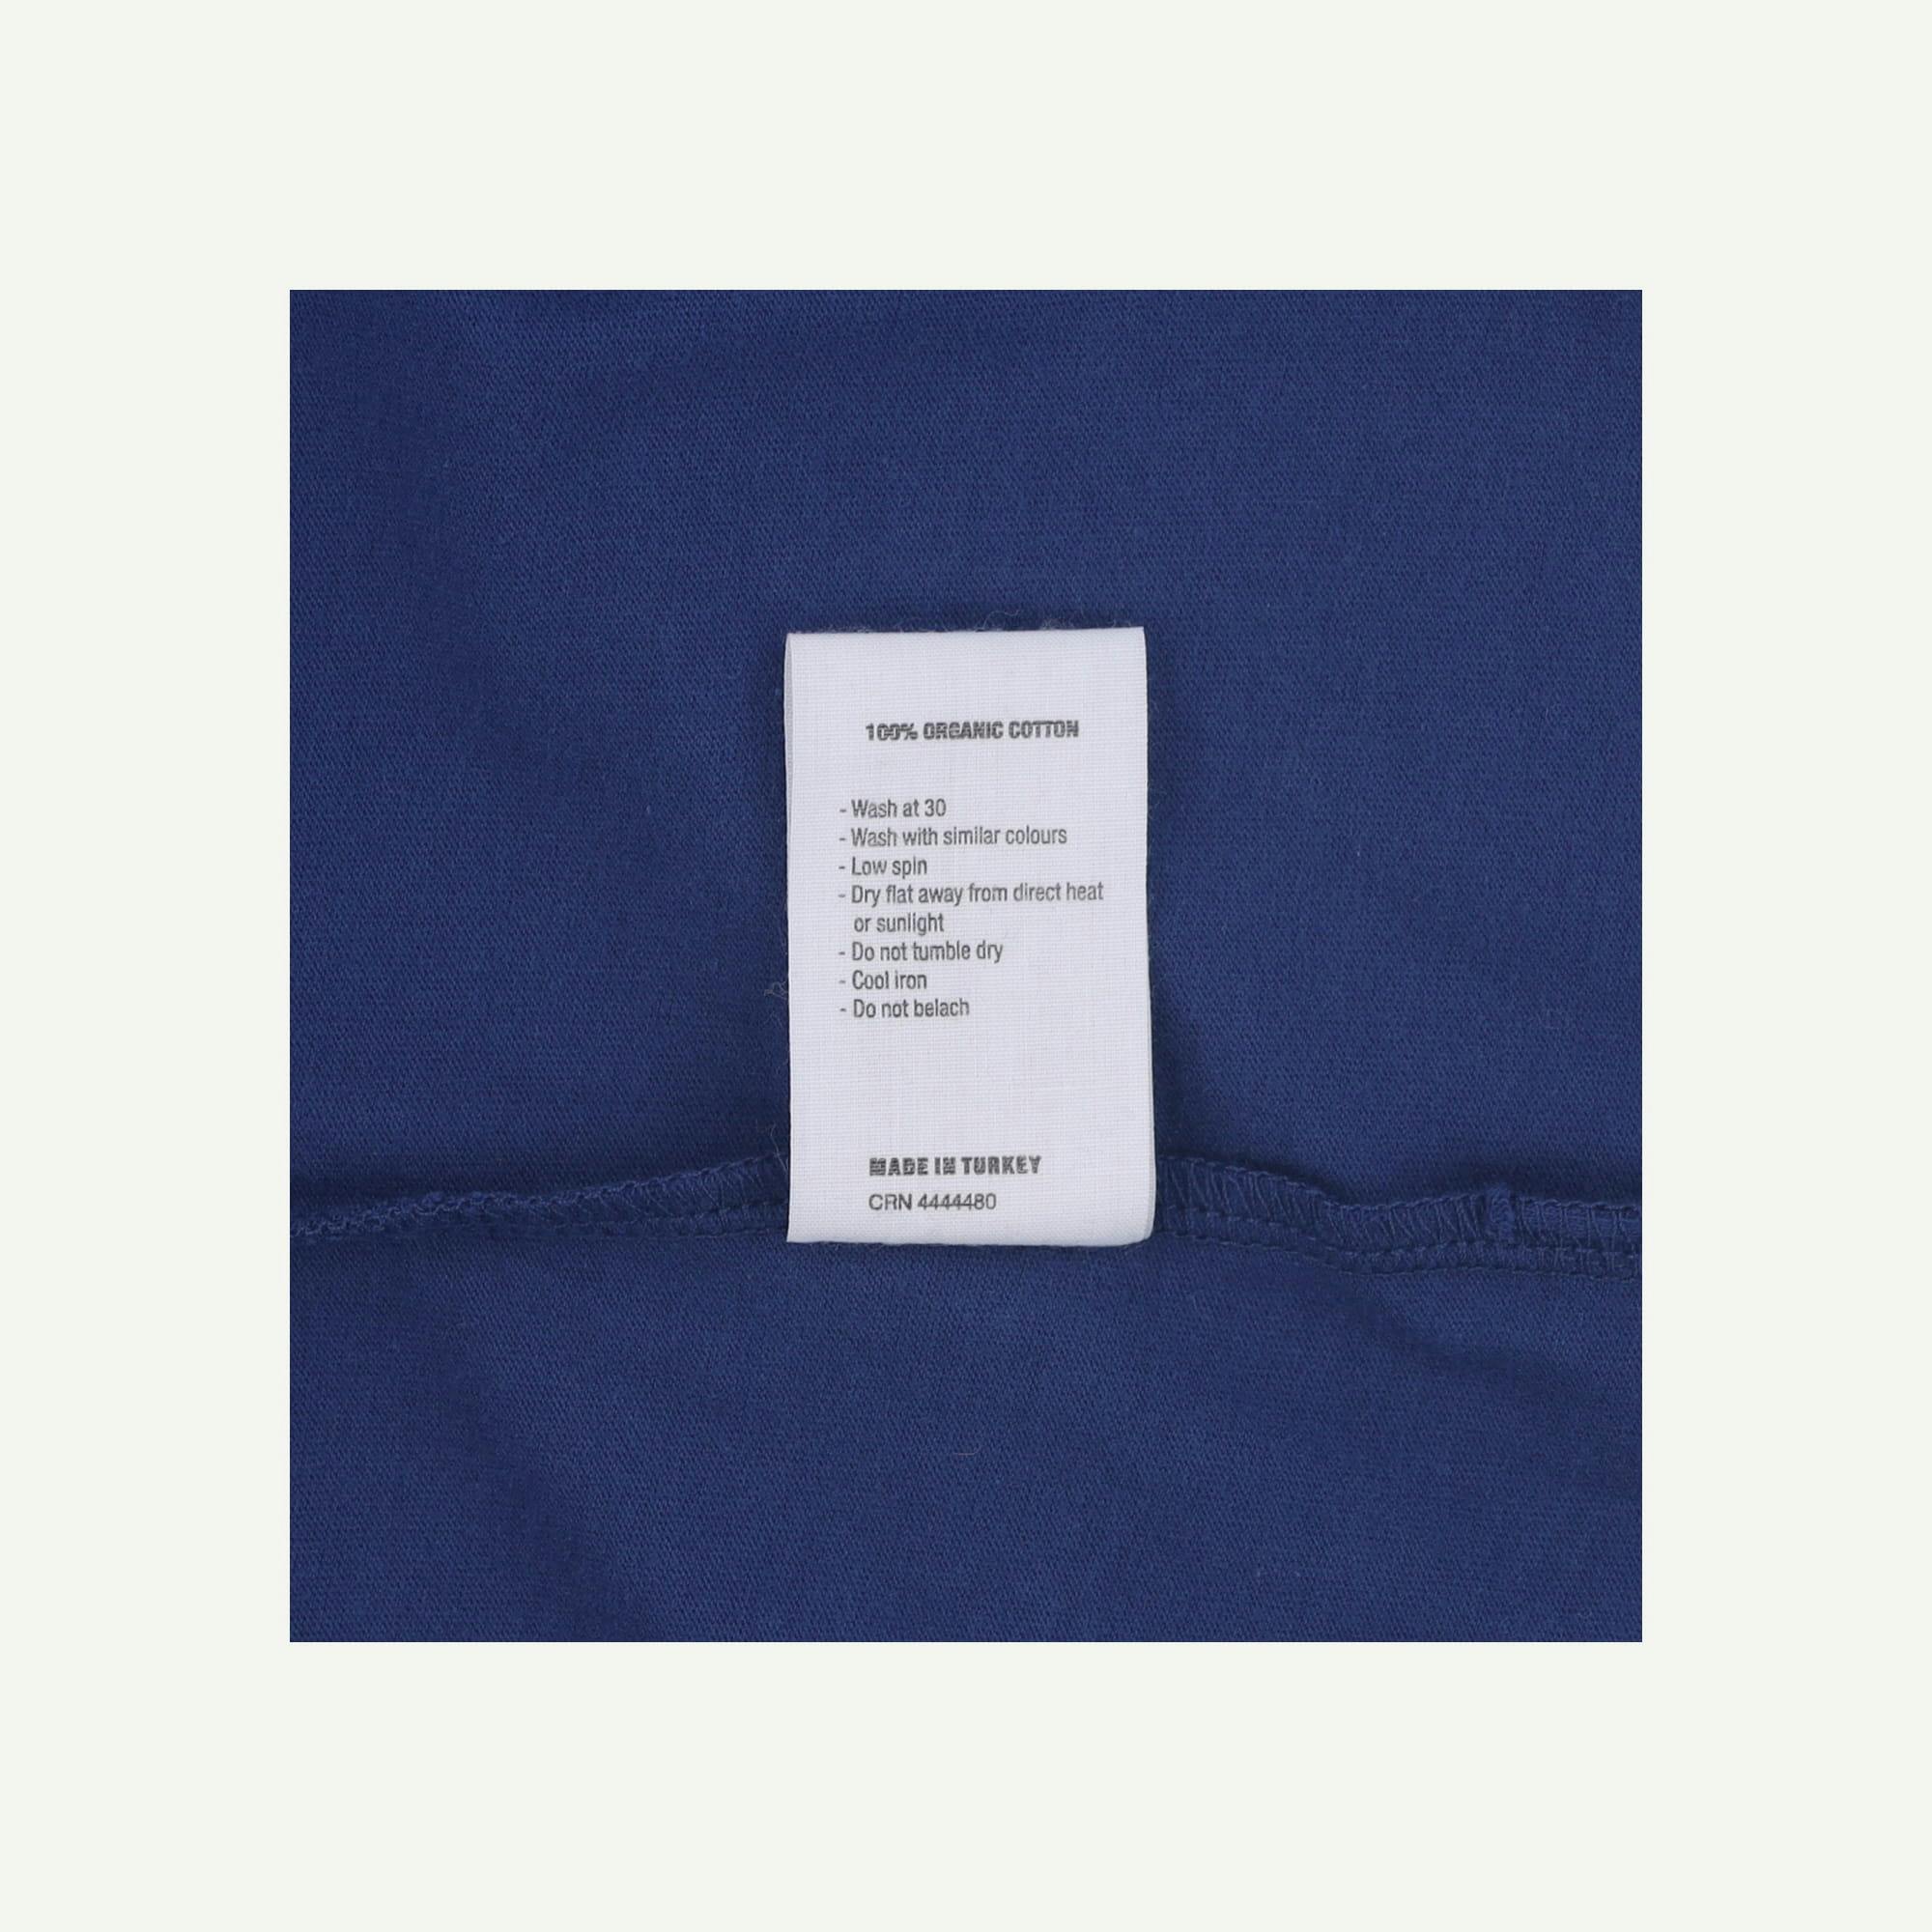 Finisterre As new Blue T-shirt